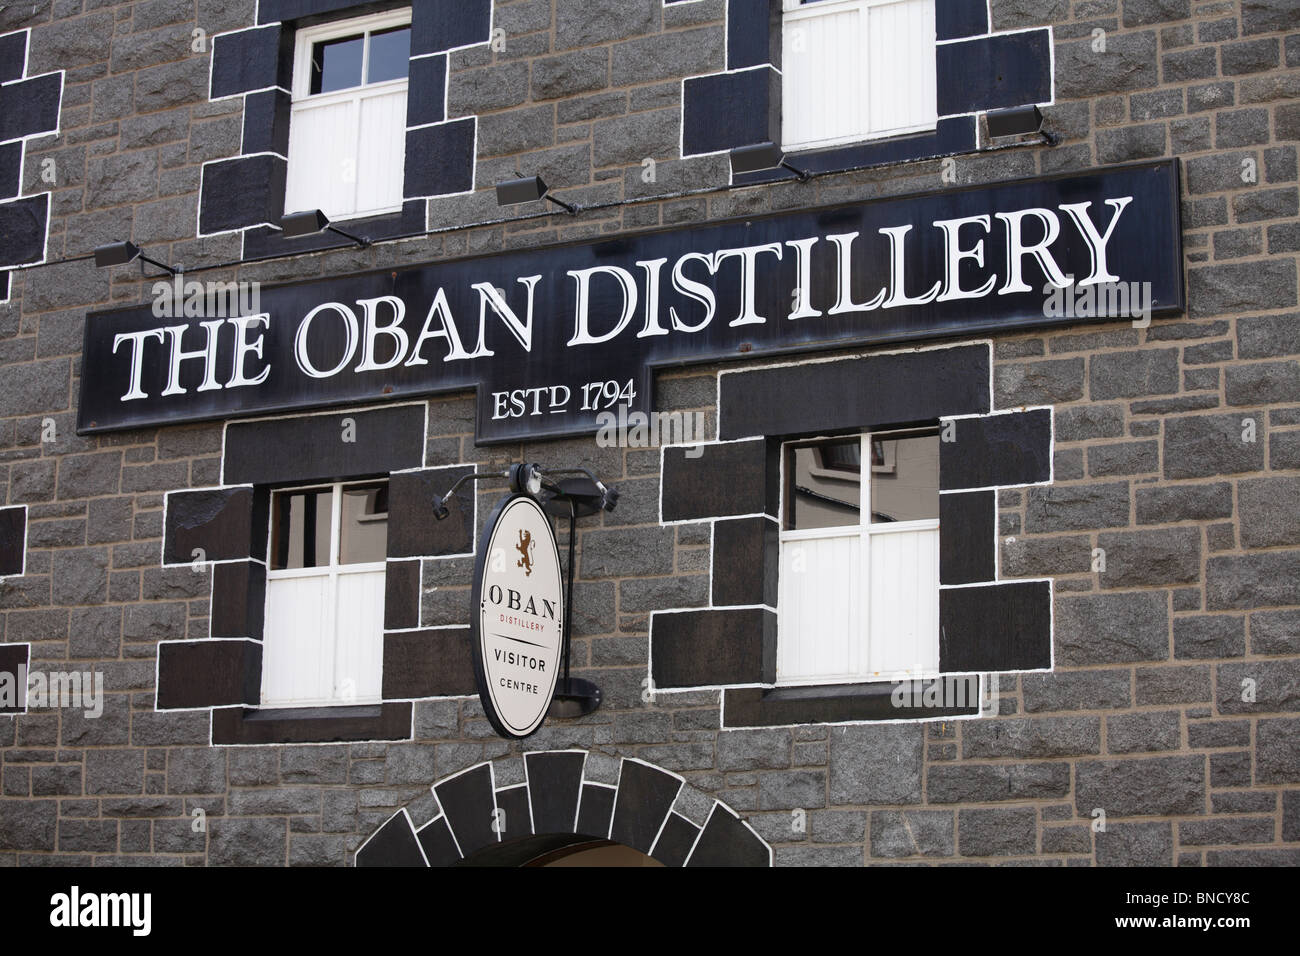 The Oban distillery visitor centre sign Stock Photo